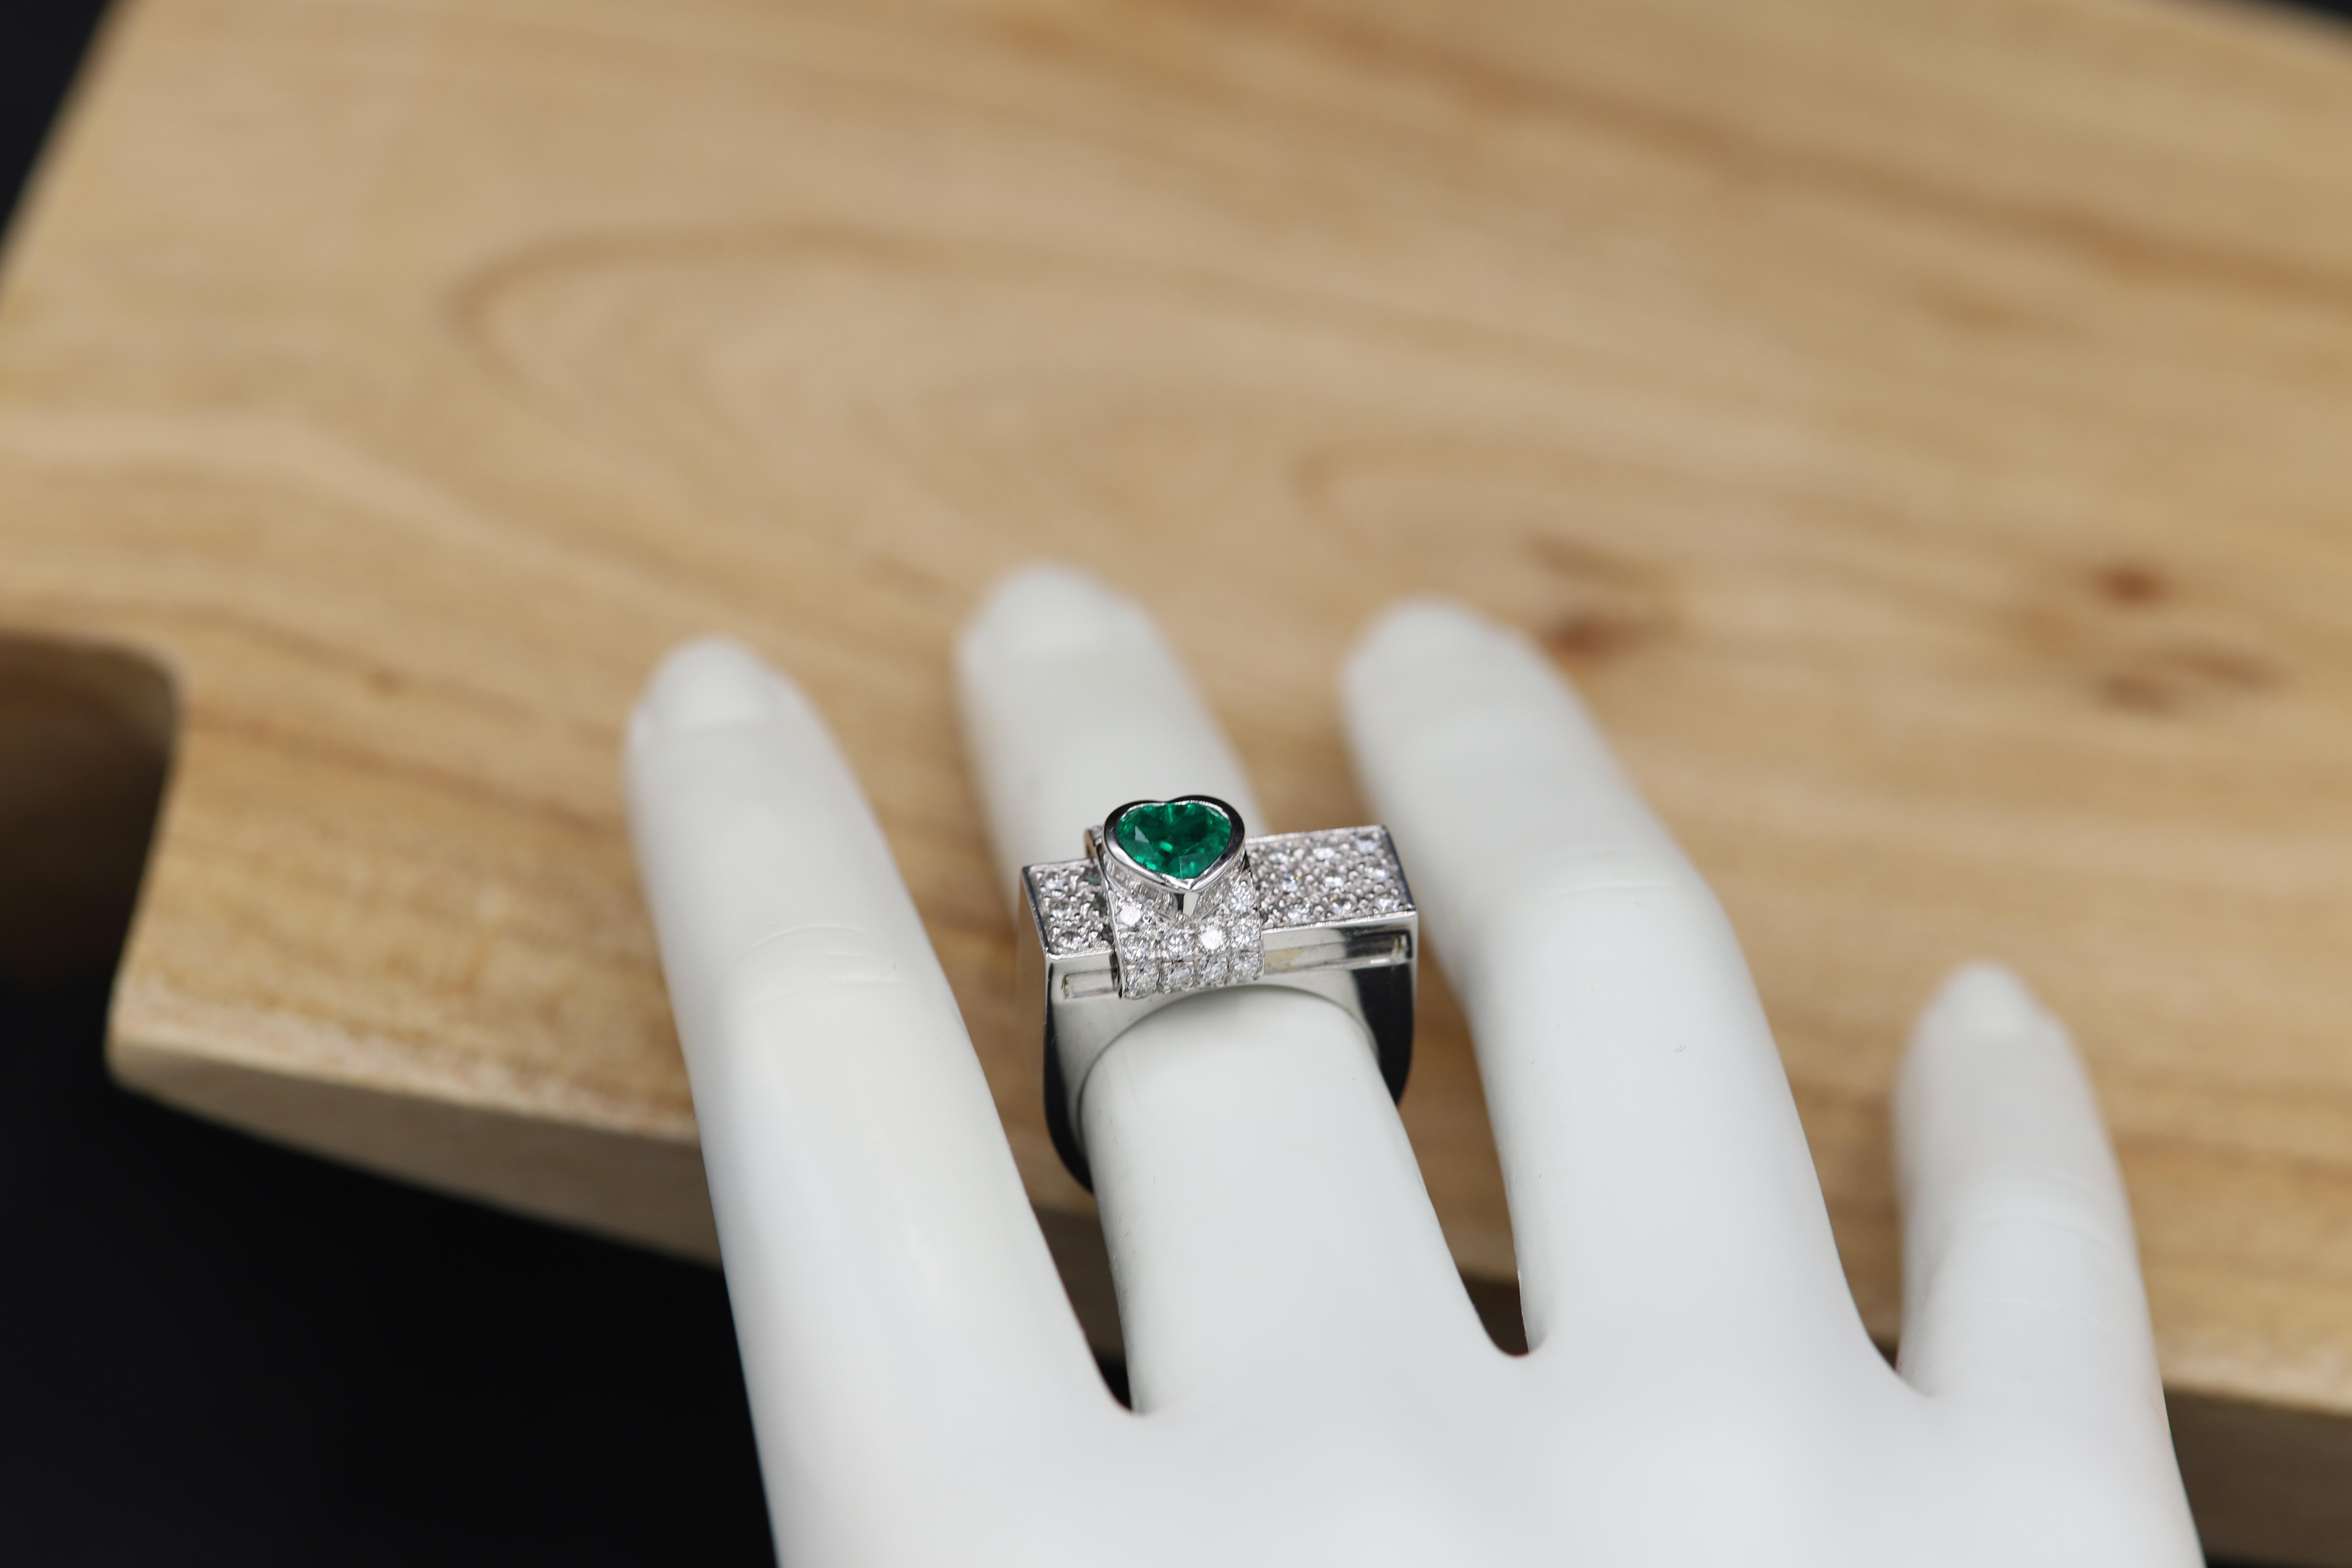 Sliding - Moving Emerald with round Diamonds ring.
Elegant Heart and good green Color
Emerald is 0.90 carat /  6 mm. 
Total Diamonds 1.15 carat GH-VS-SI.
18k White Gold 15.30 grams.
Finger size 6.5

 